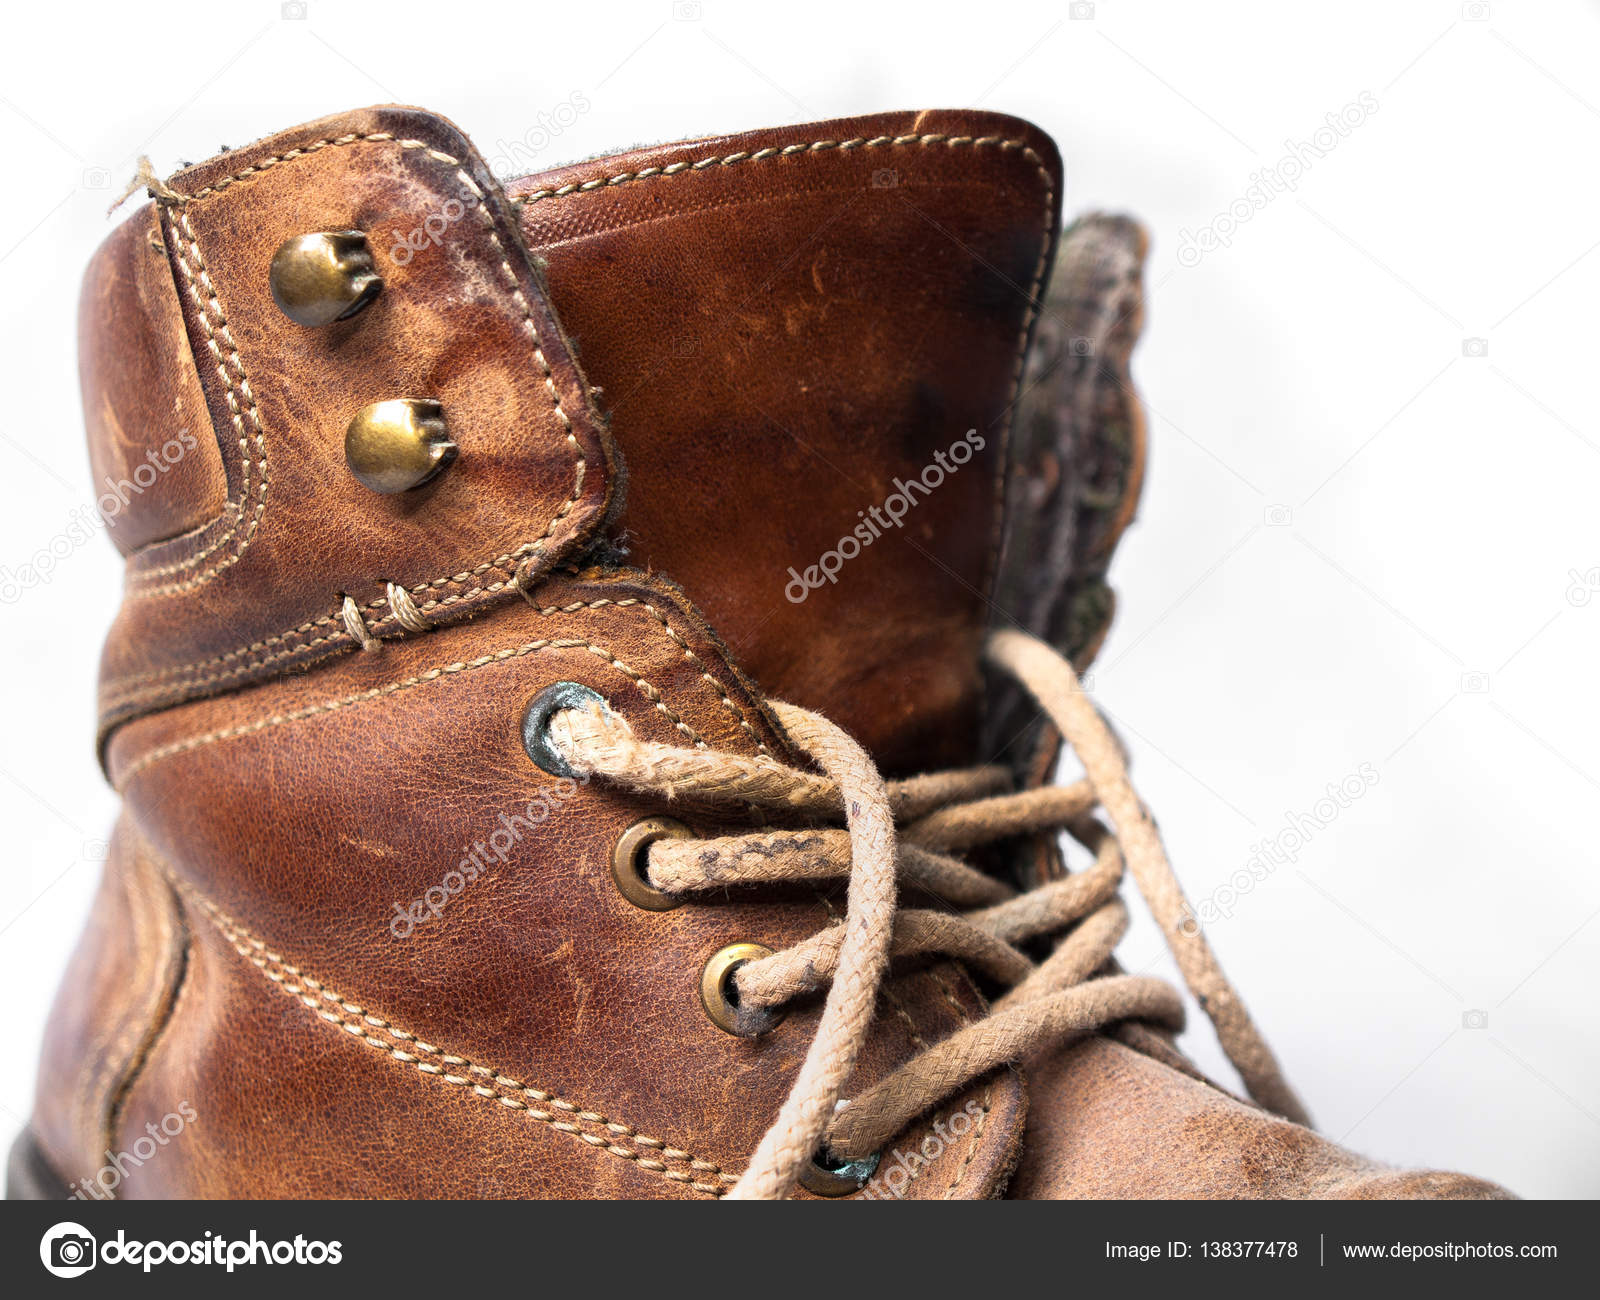 Worn out leather boot — Stock Photo © allgaierphoto #138377478